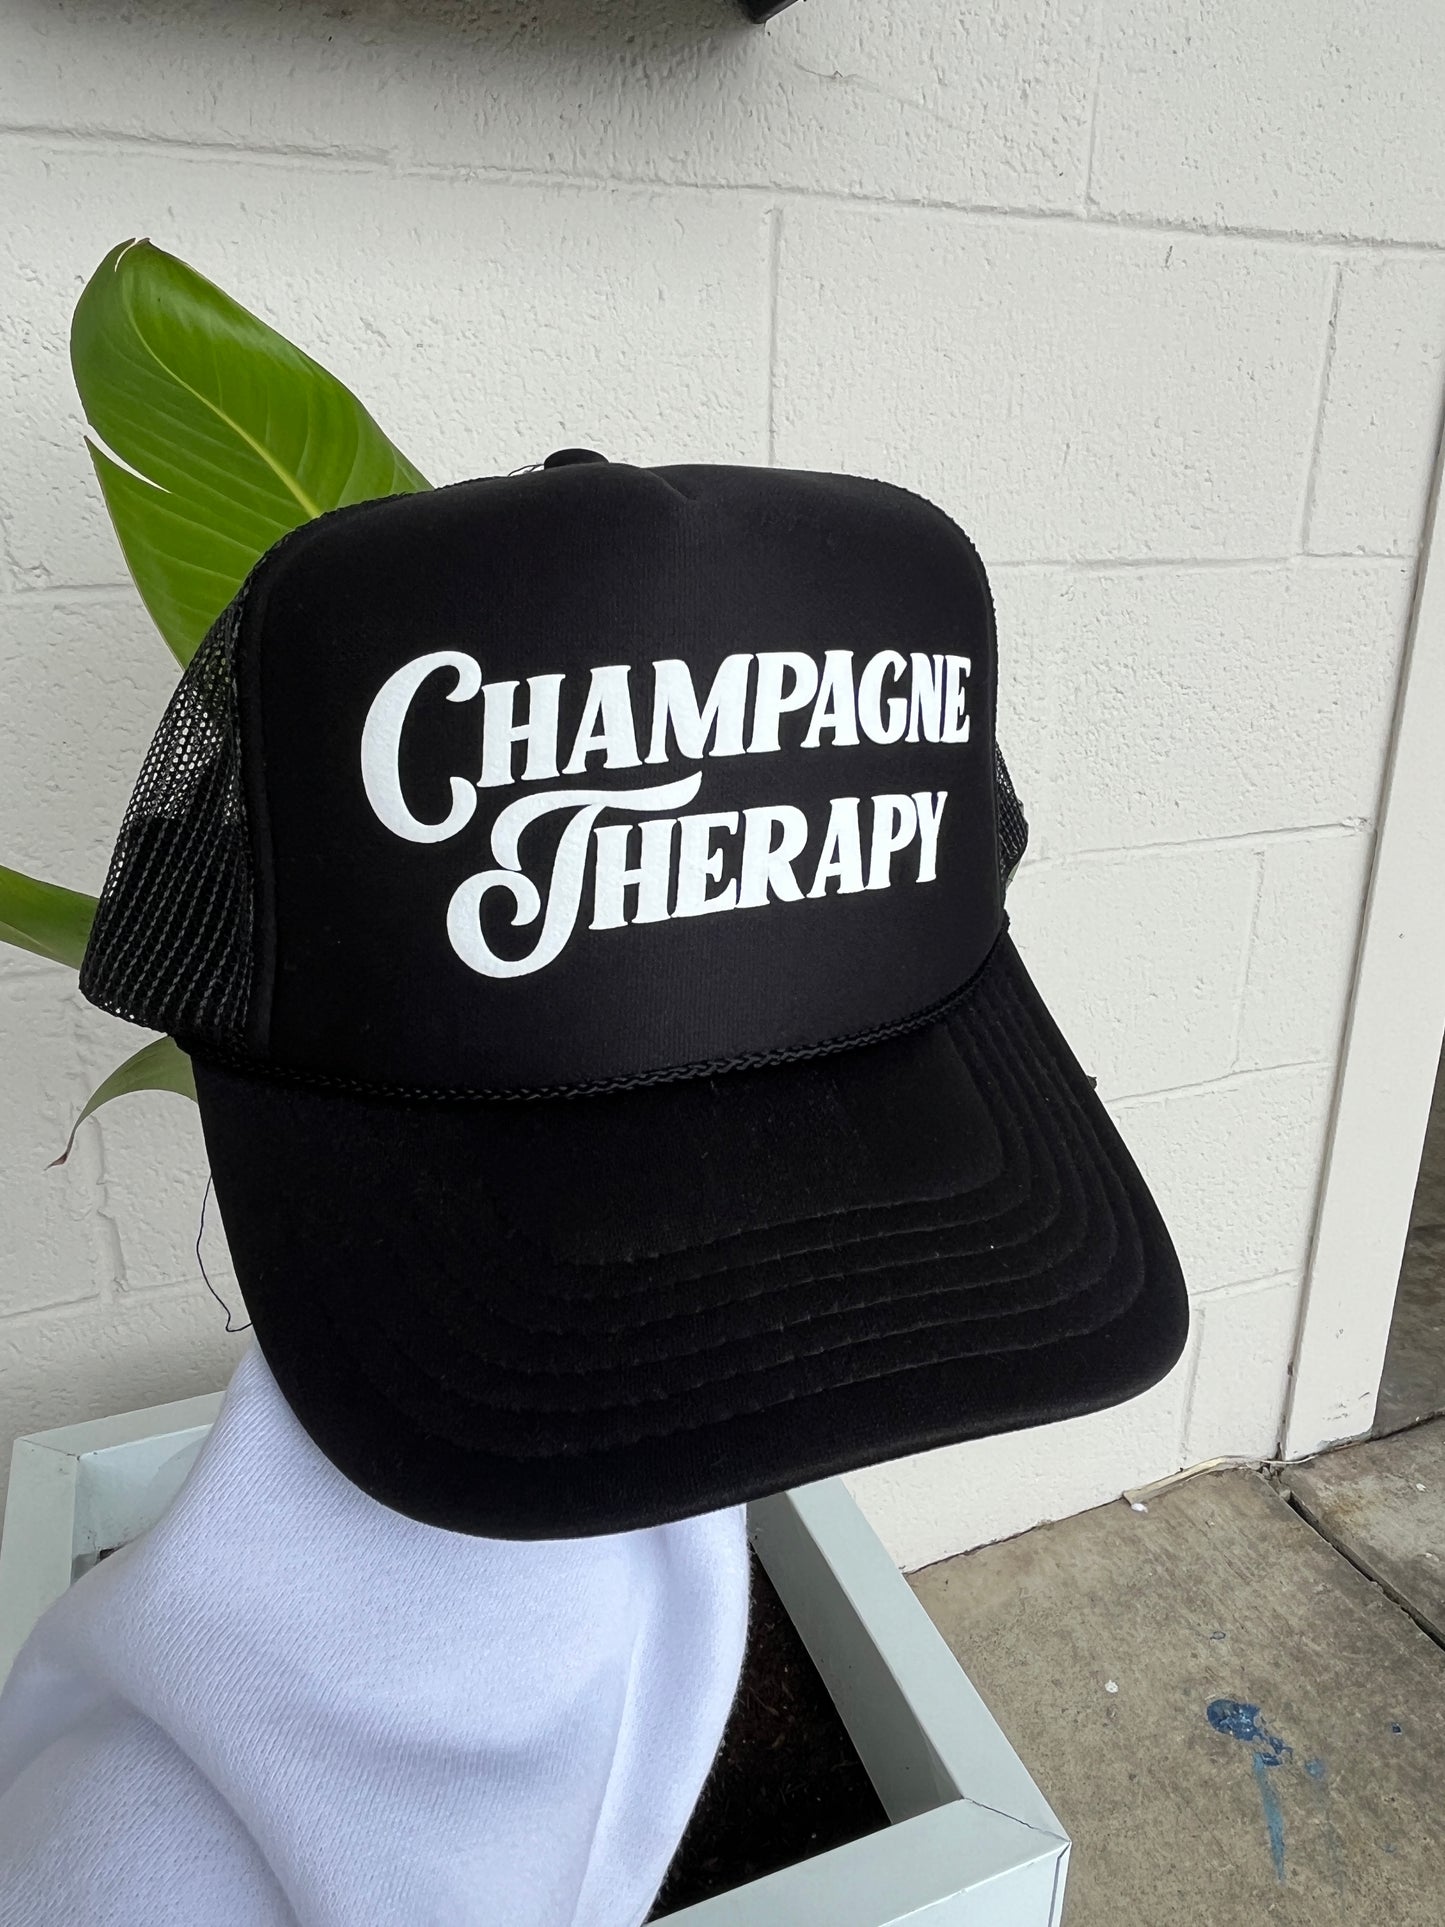 Champagne Therapy Trucker Hat